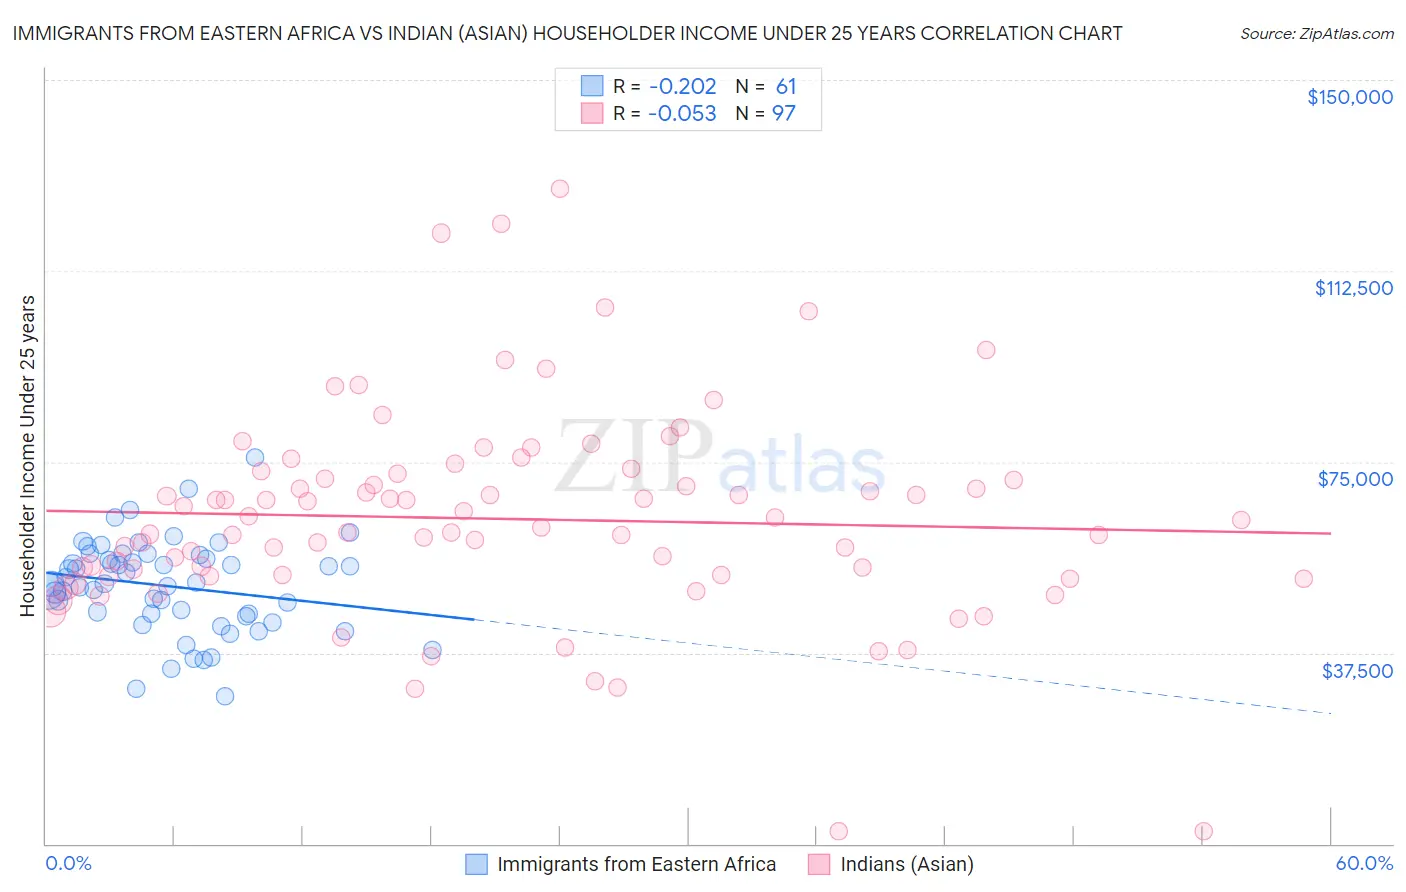 Immigrants from Eastern Africa vs Indian (Asian) Householder Income Under 25 years